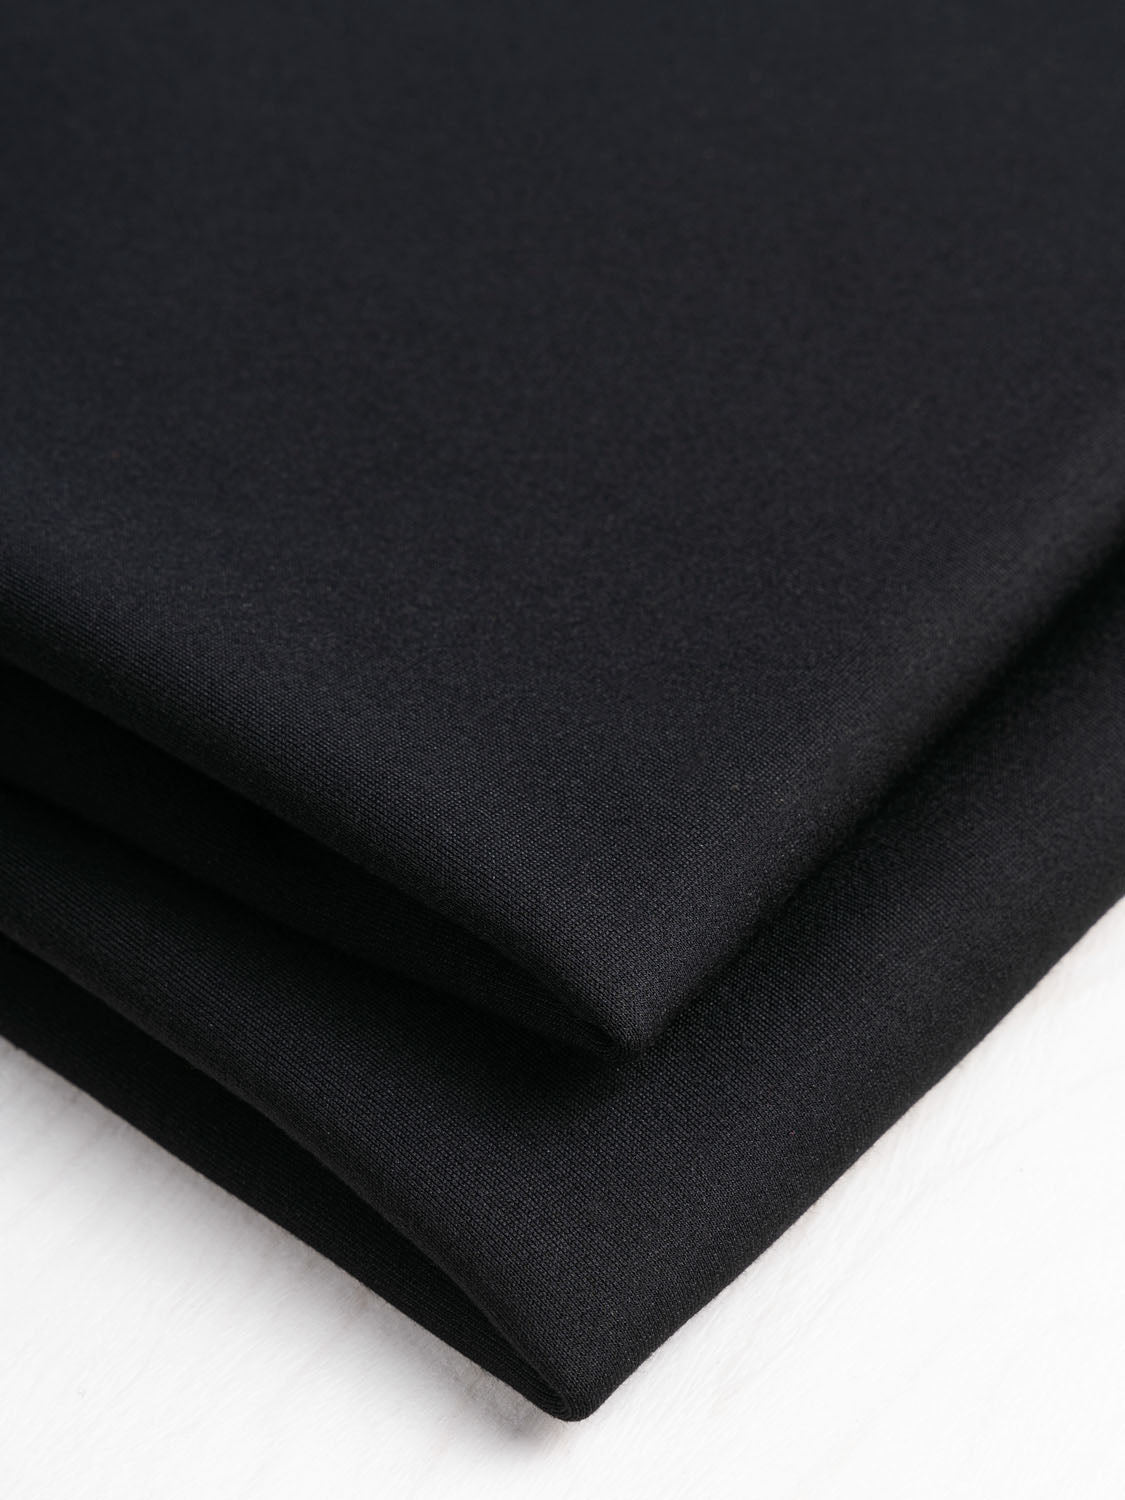 Ponte Double Stretch Knit Black, Fabric by the Yard